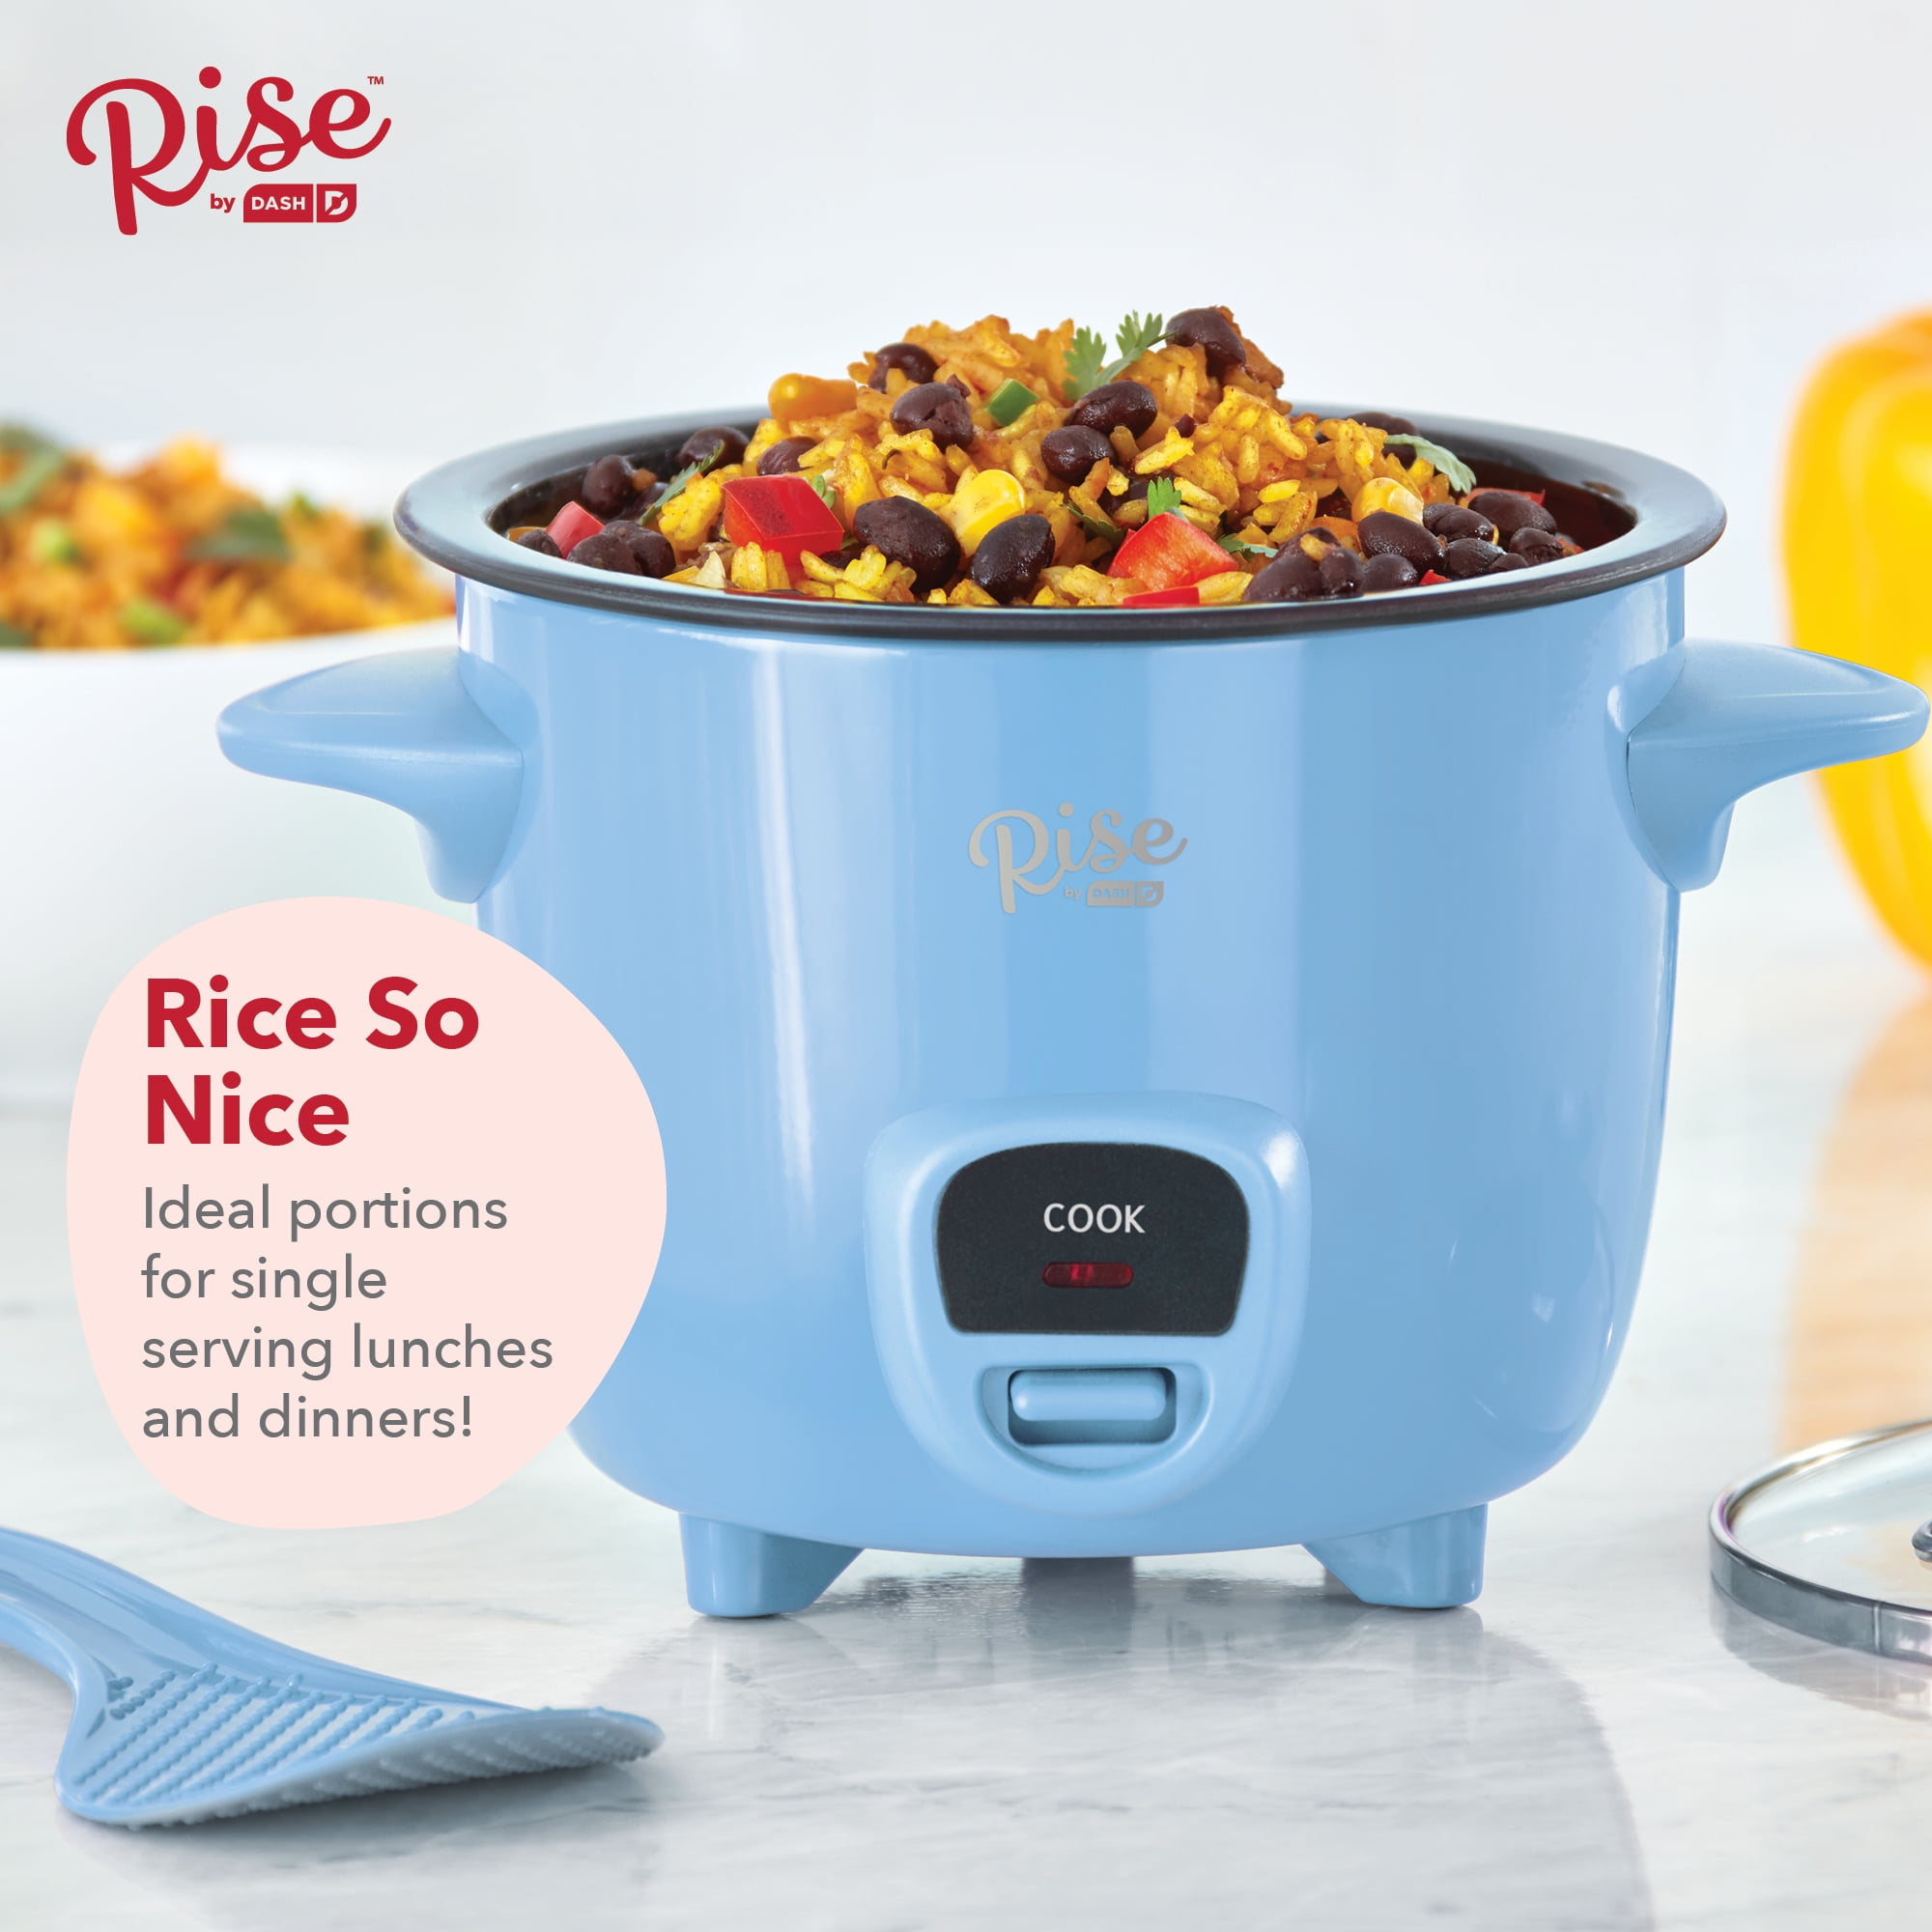 Rise by Dash Mini Rice Cooker 2 Cups - Removable Non-Stick - Soups, Grains  & Oatmeal - New 